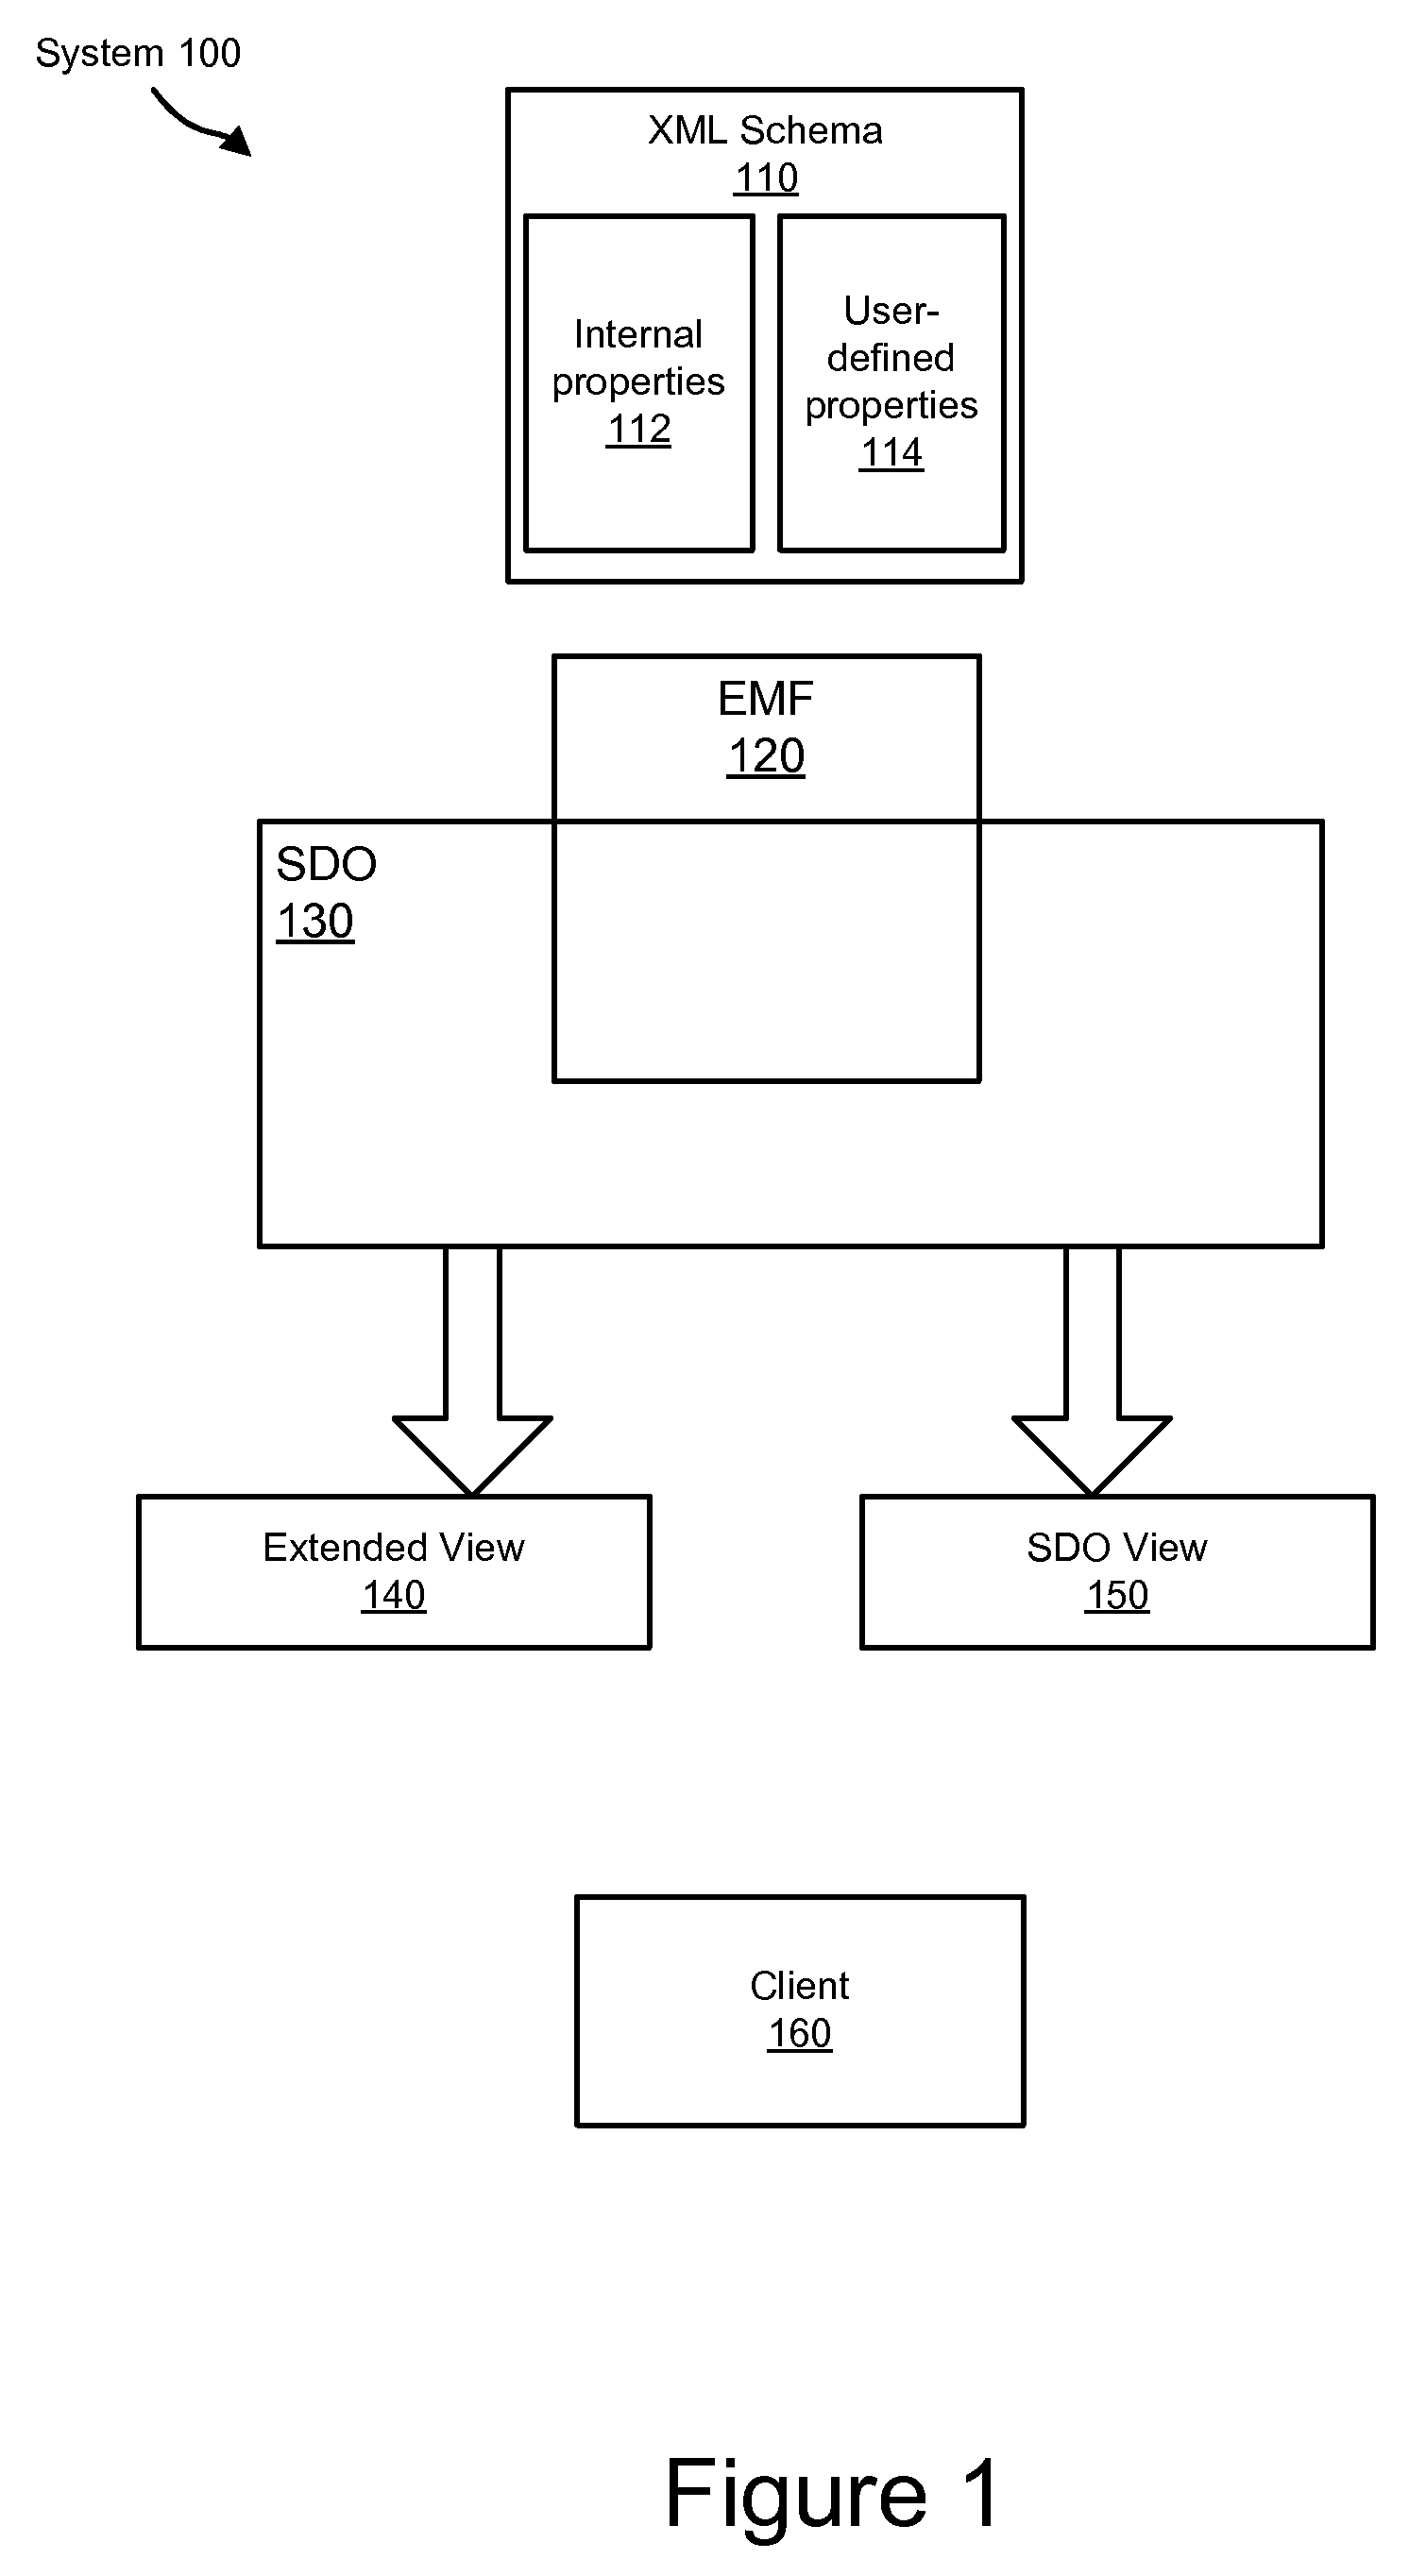 Apparatus, system, and method for hiding advanced XML schema properties in EMF objects